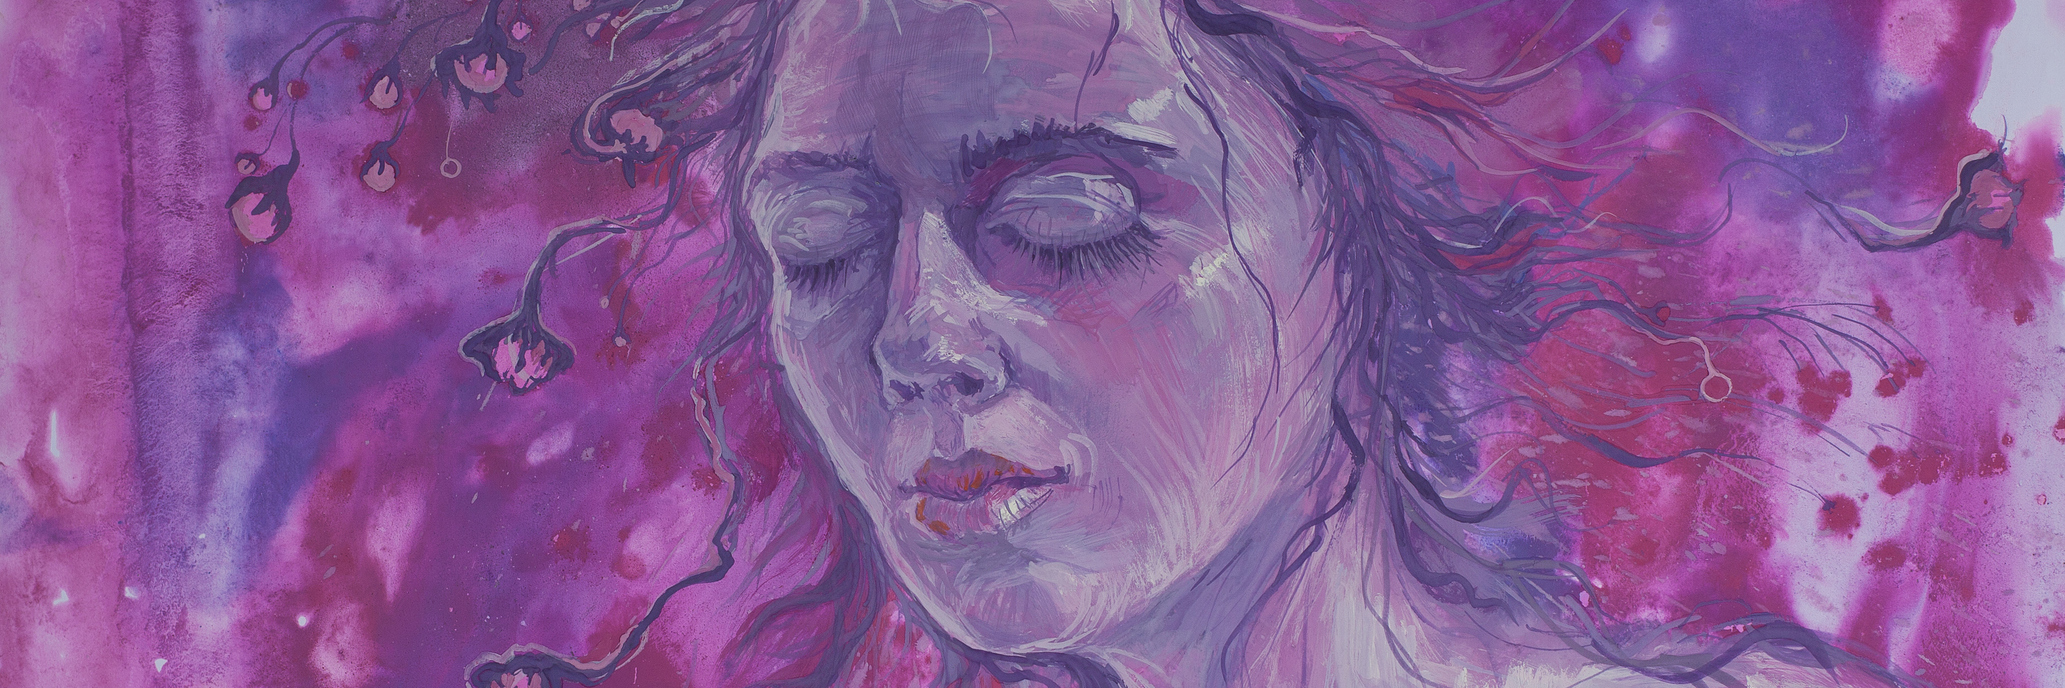 purple and pink painting of a woman